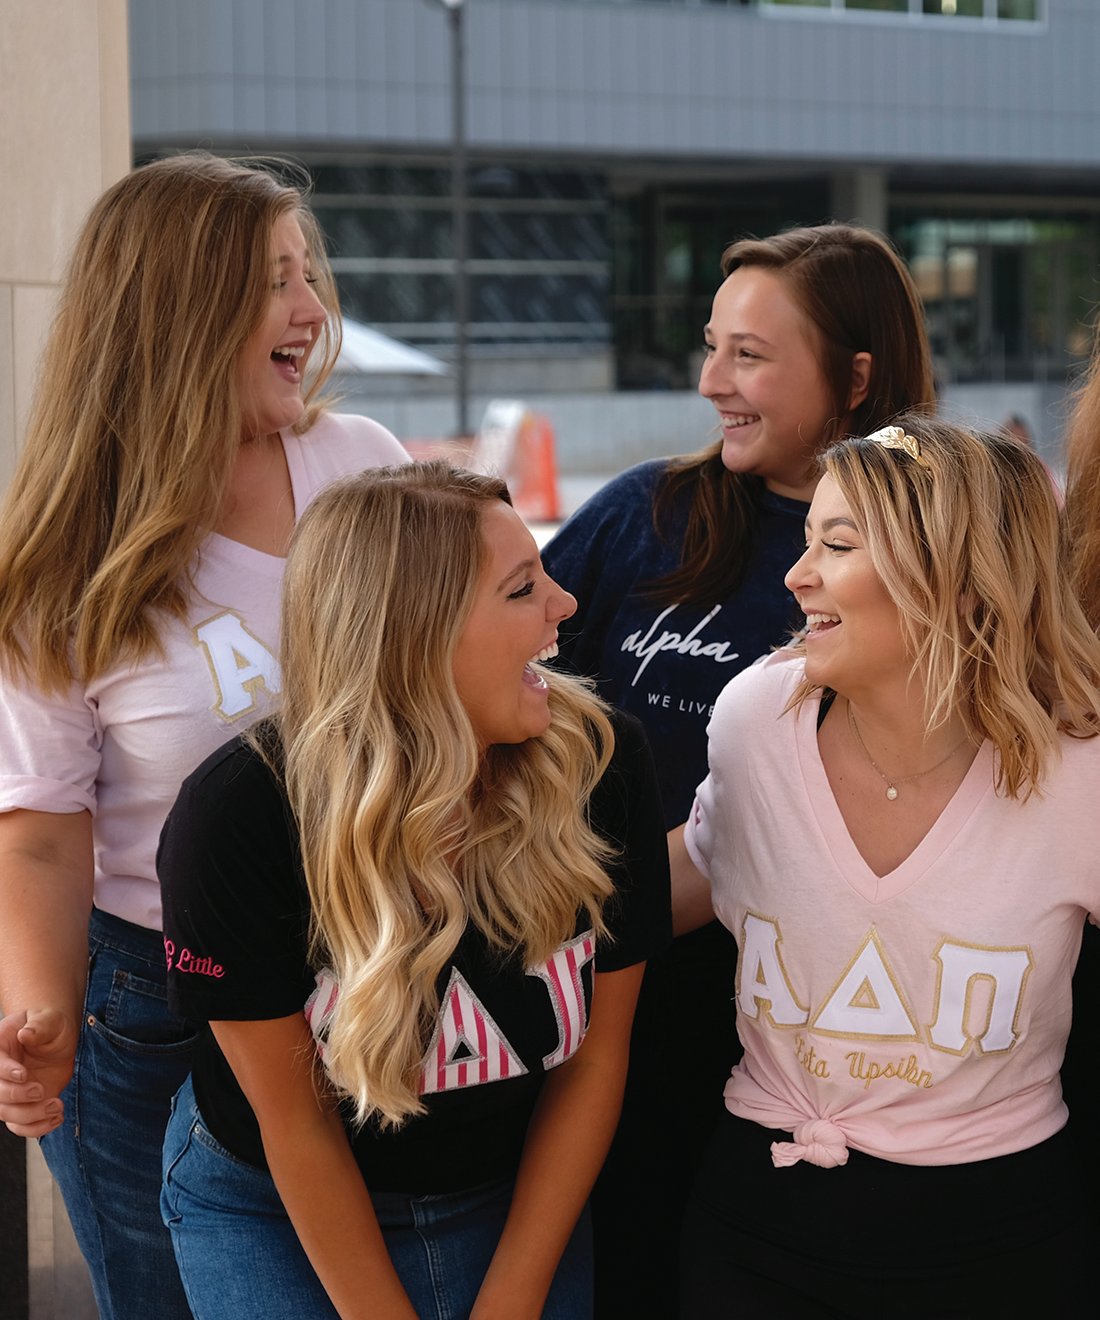 Four members of Alpha Delta Pi sorority laughing and smiling